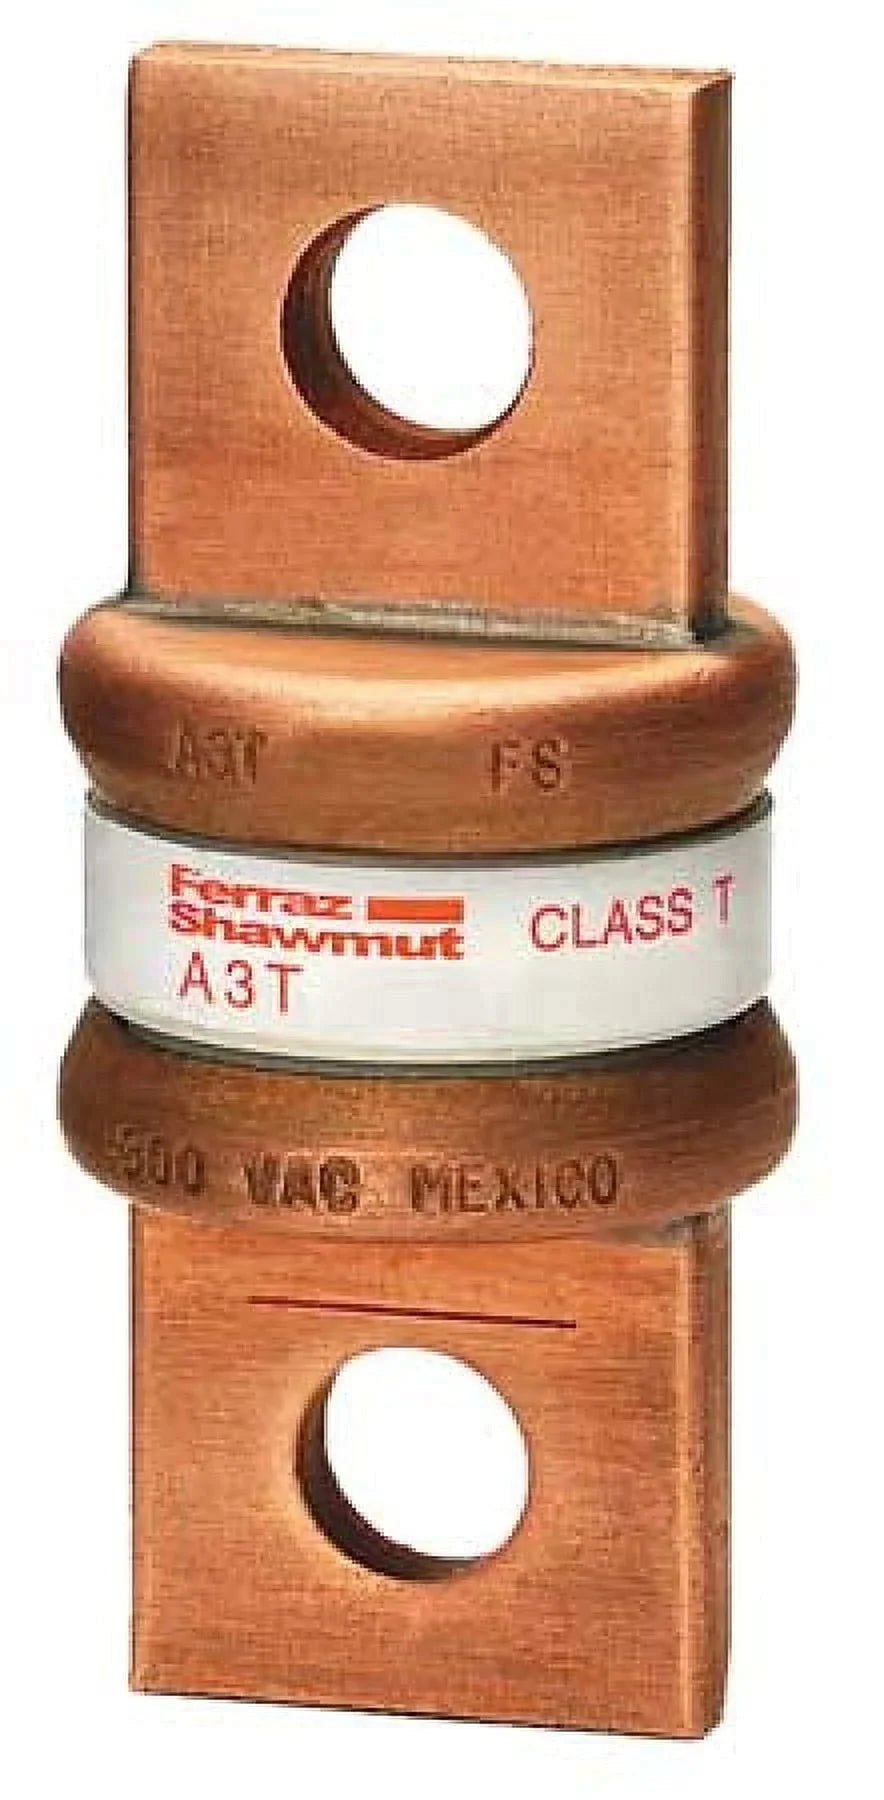 Fuse Amp-Trap® 300V 25A Fast-Acting Class T A3T Series